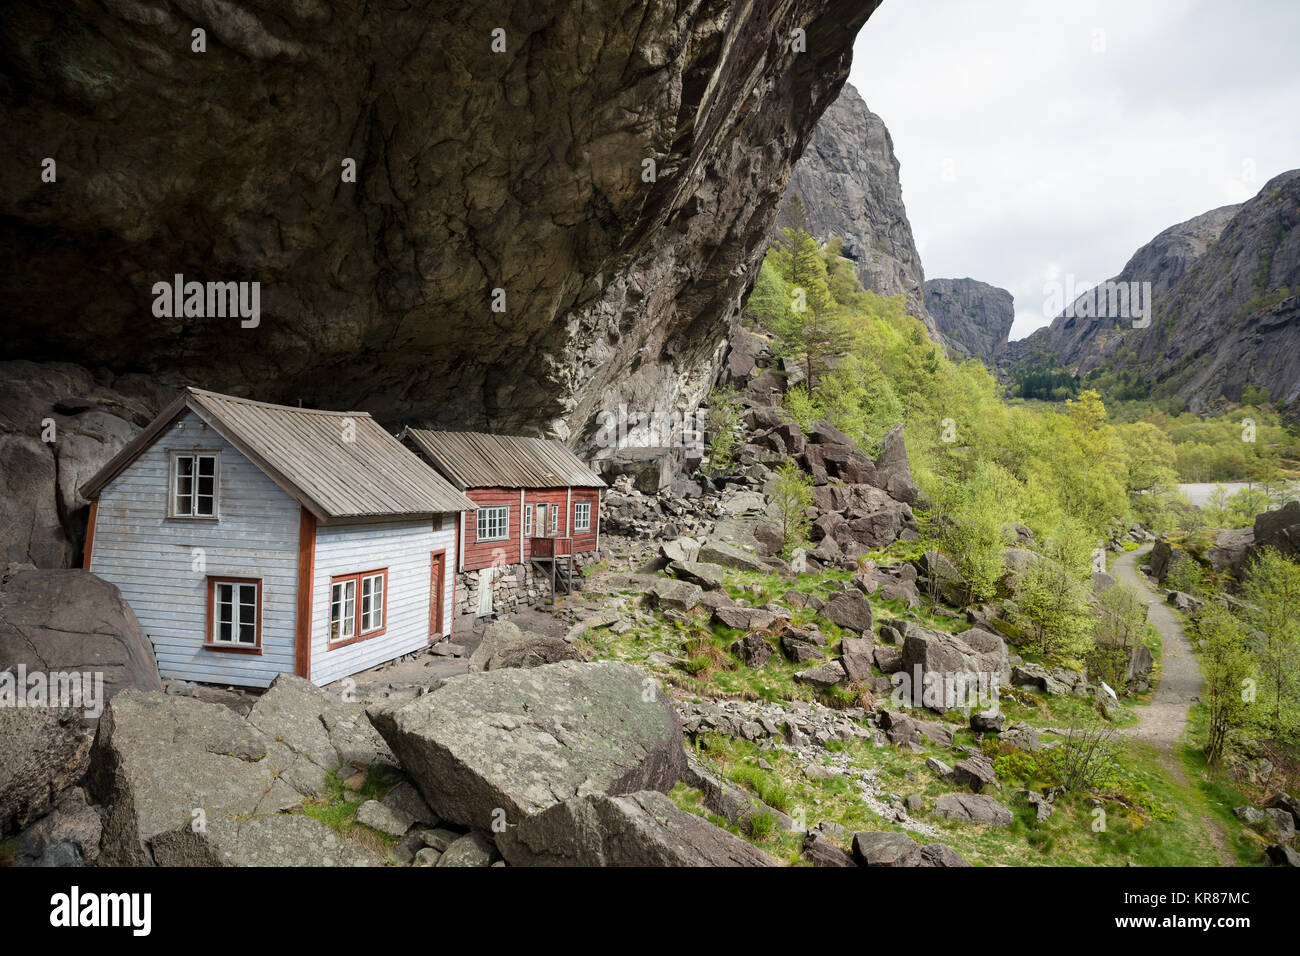 Abandoned old wooden houses dating back to the 1800s stand under a huge overhanging rock called Helleren forming a natural roof - Jossingfjord, Norway Stock Photo